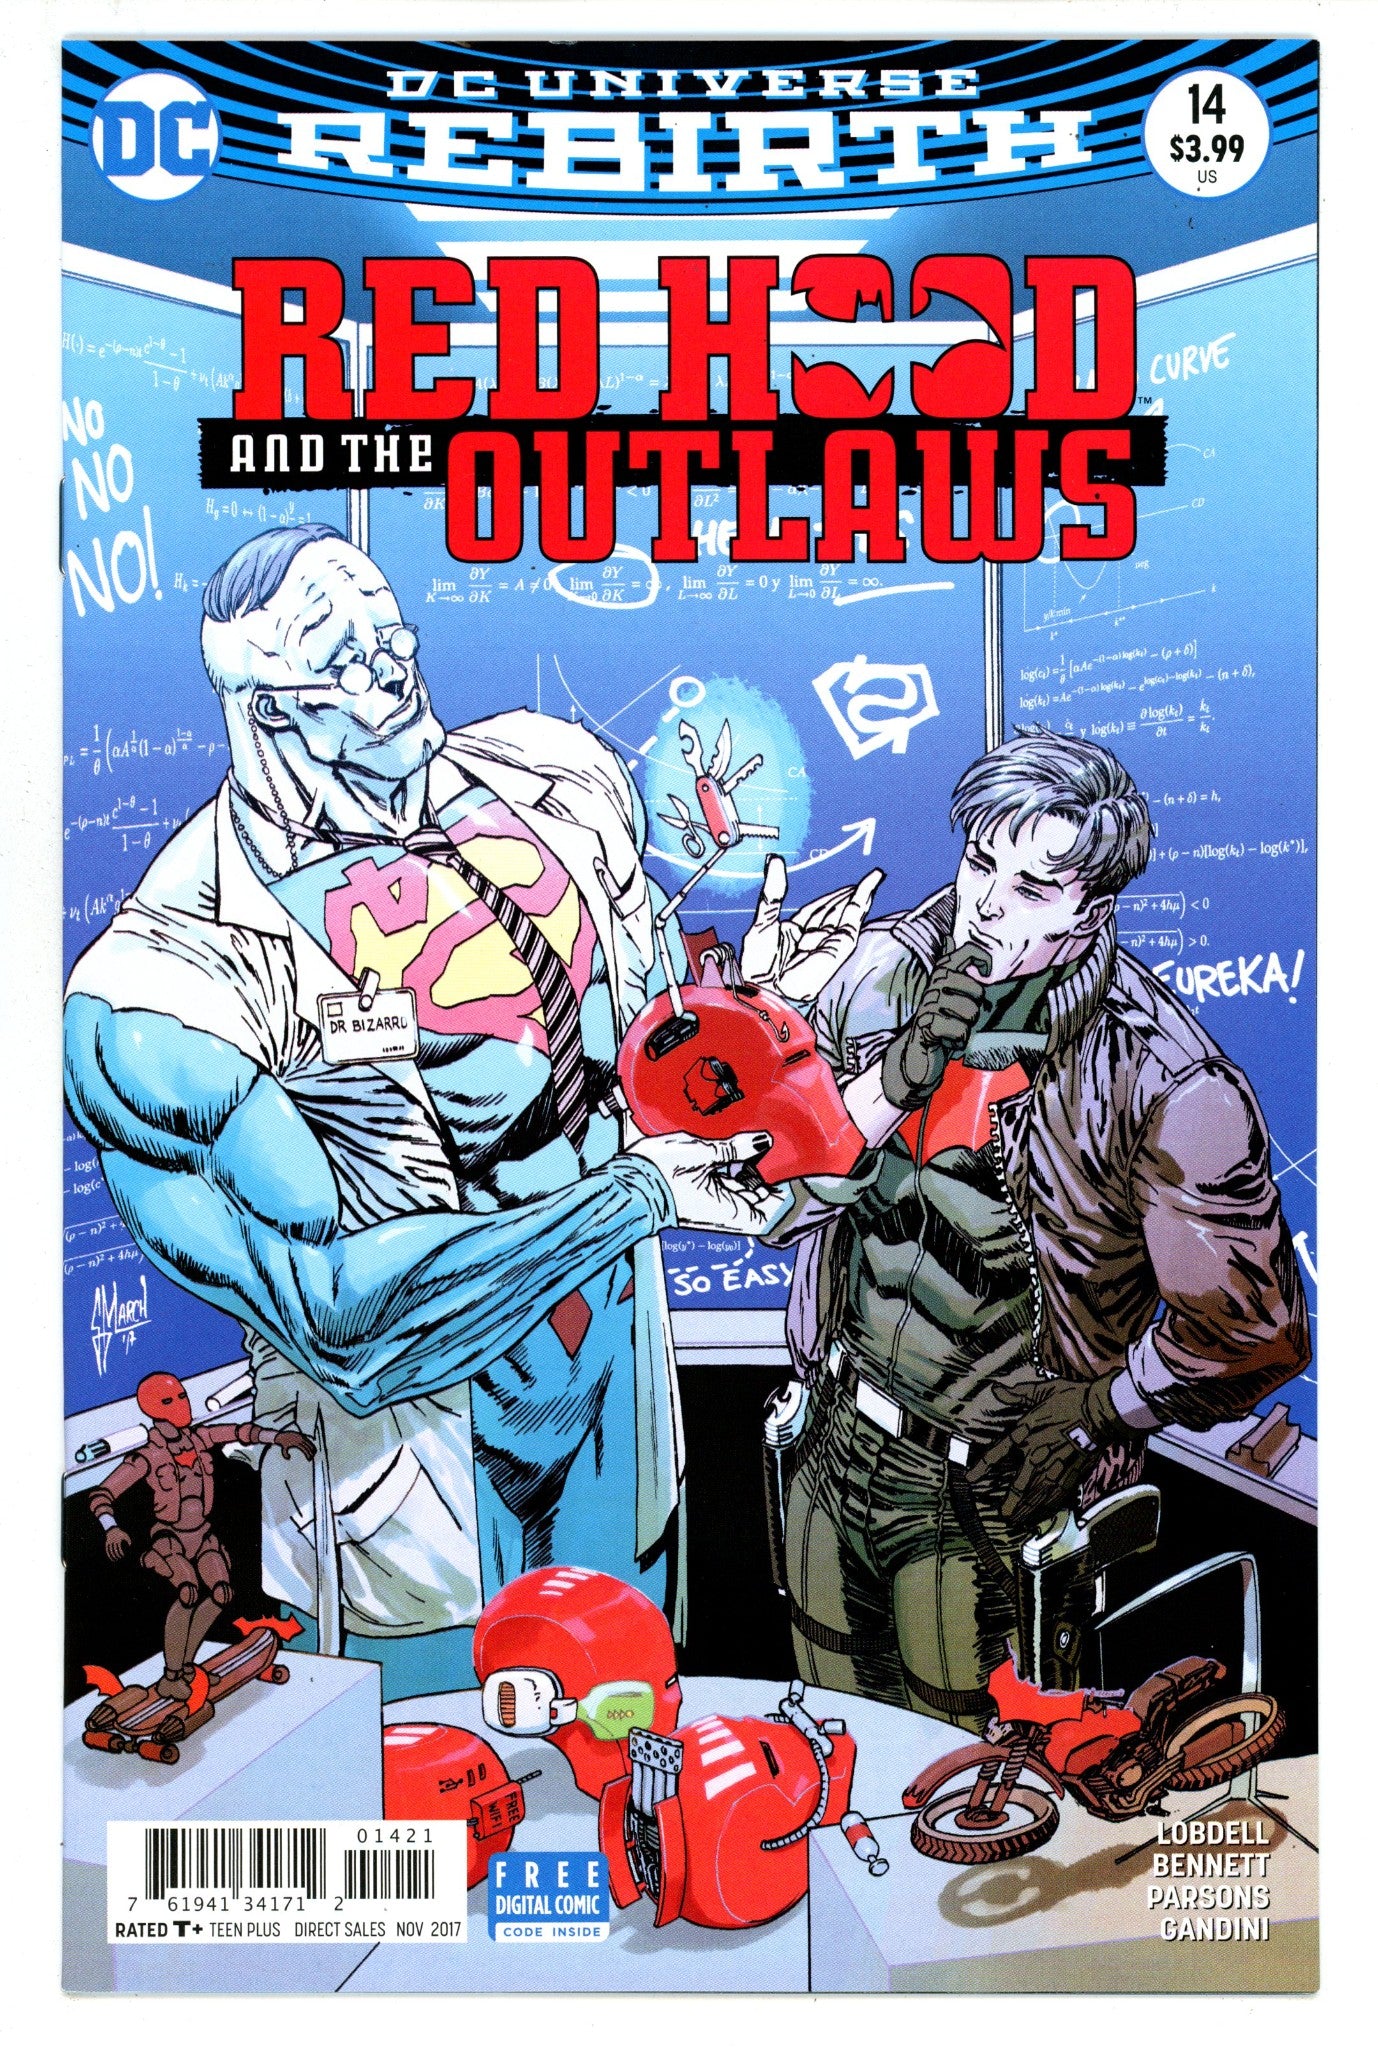 Red Hood and the Outlaws Vol 2 14 High Grade (2017) March Variant 